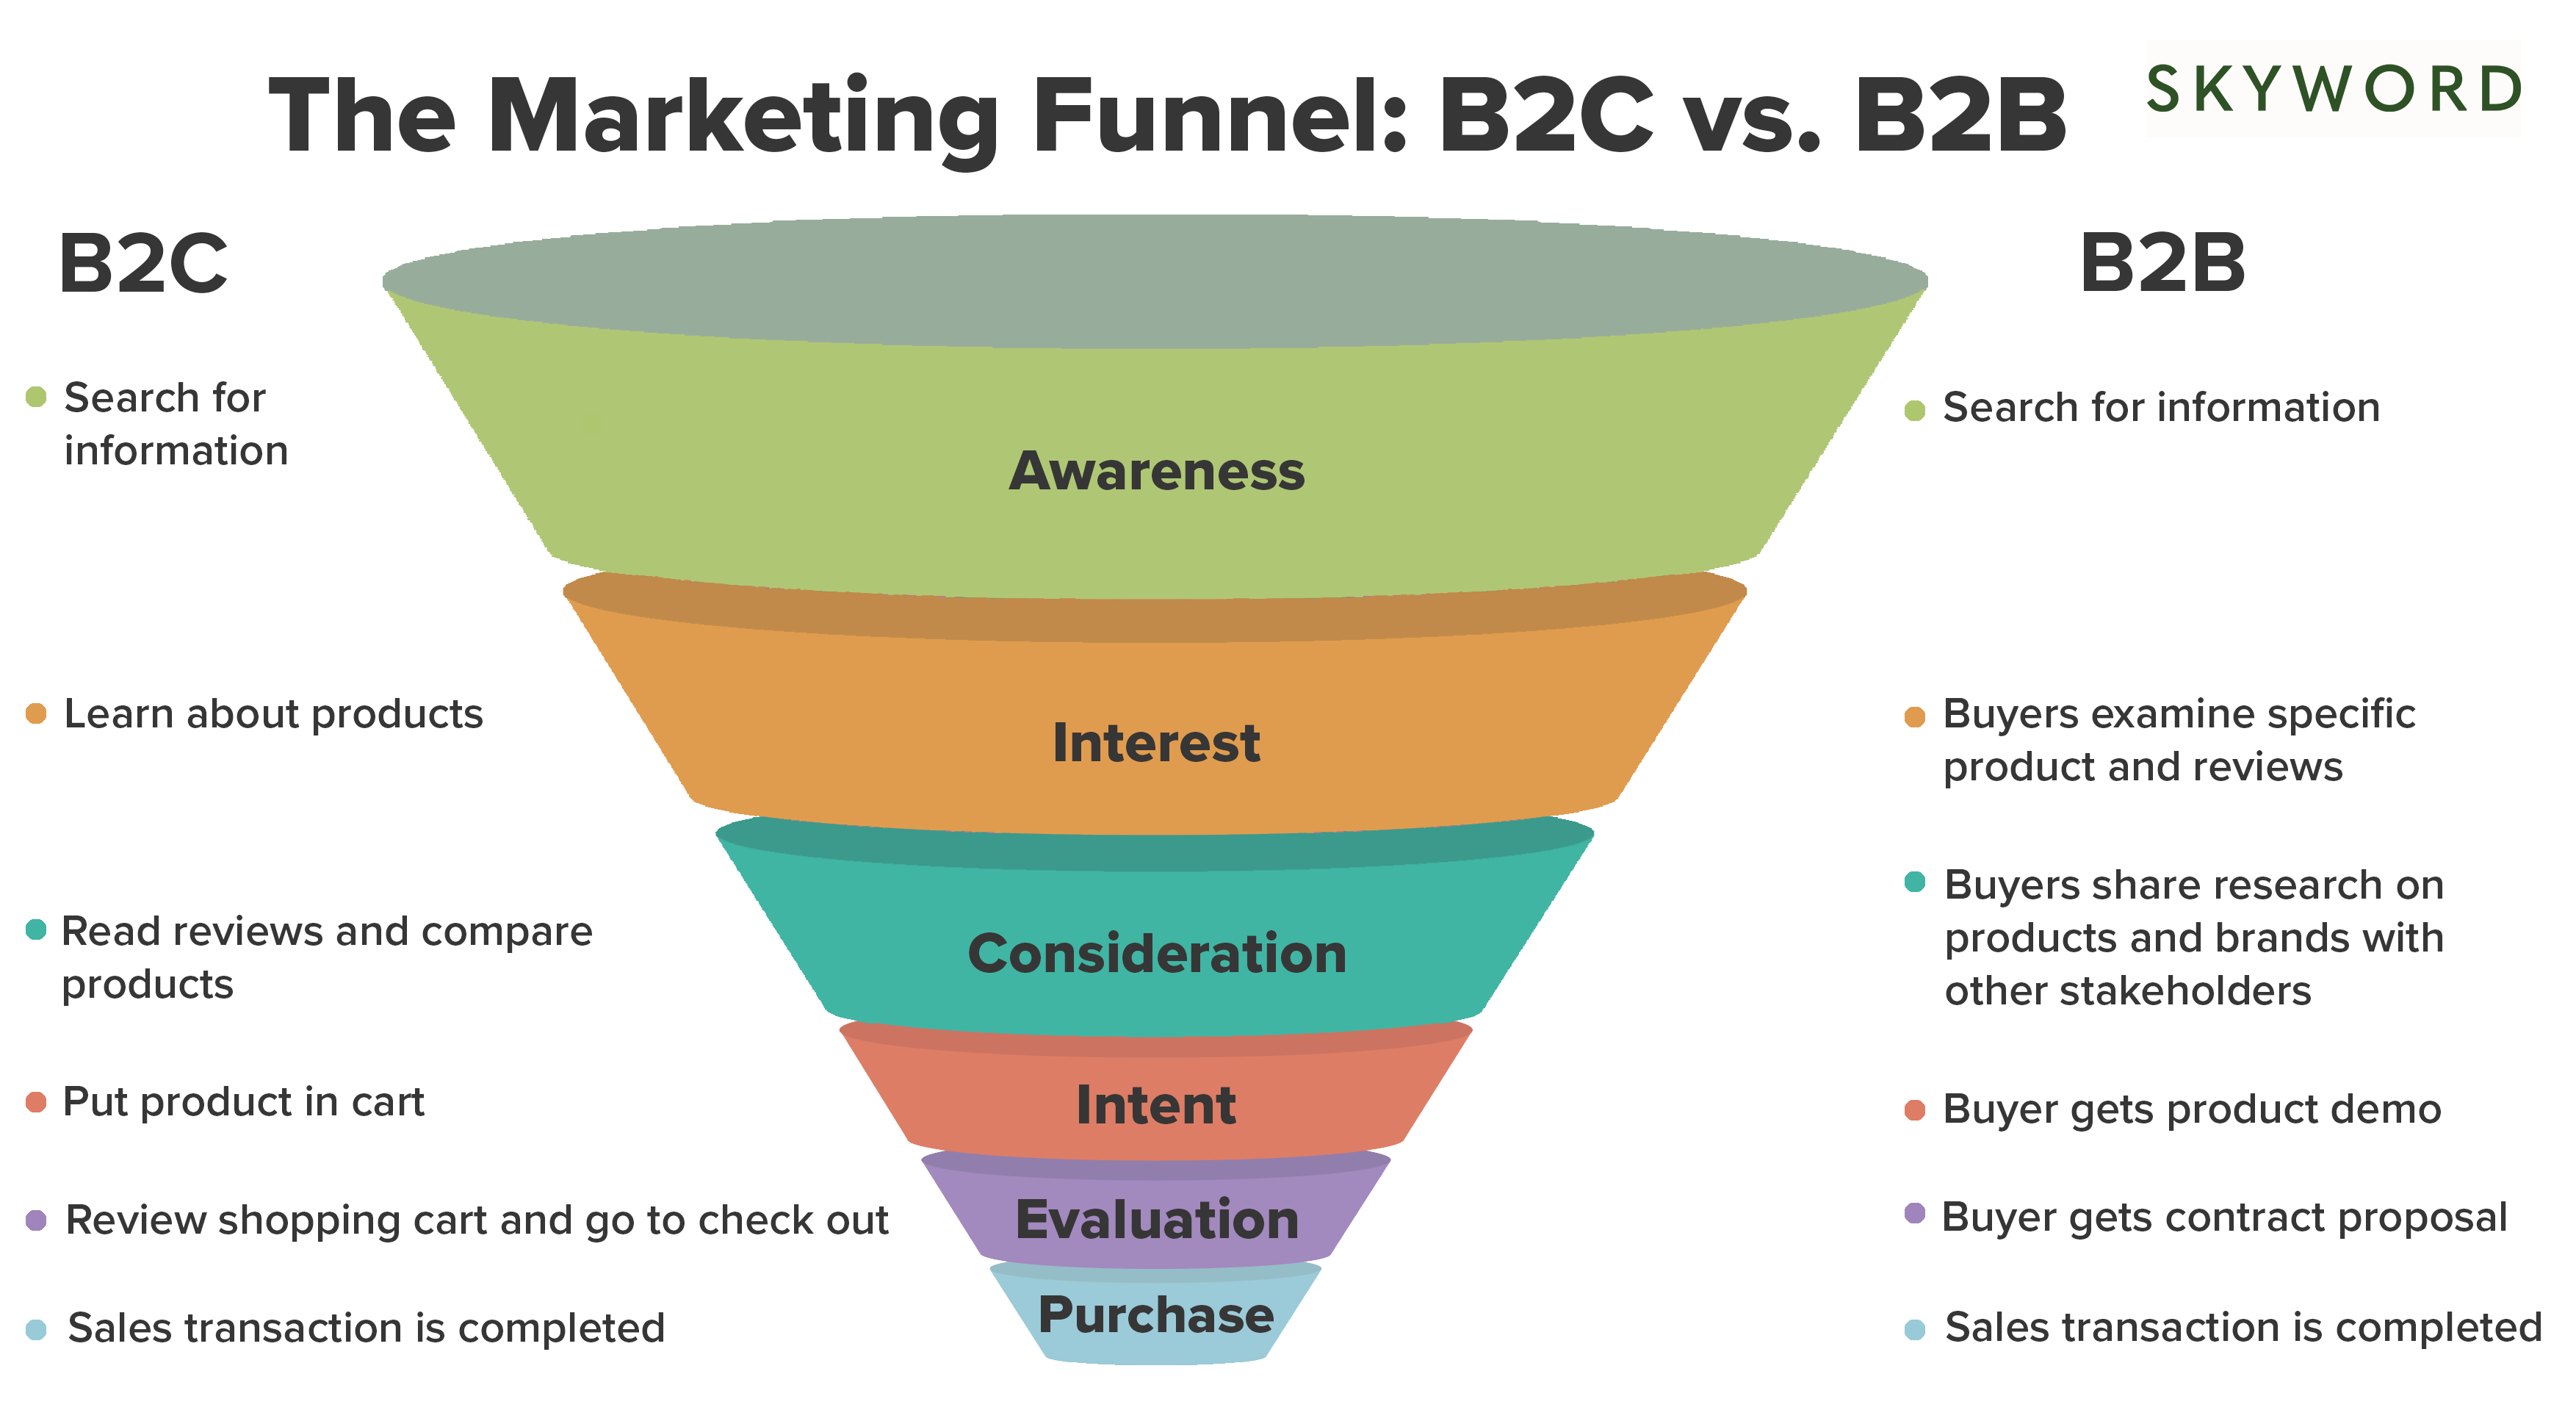 "Marketing funnel for B2C and B2B companies"